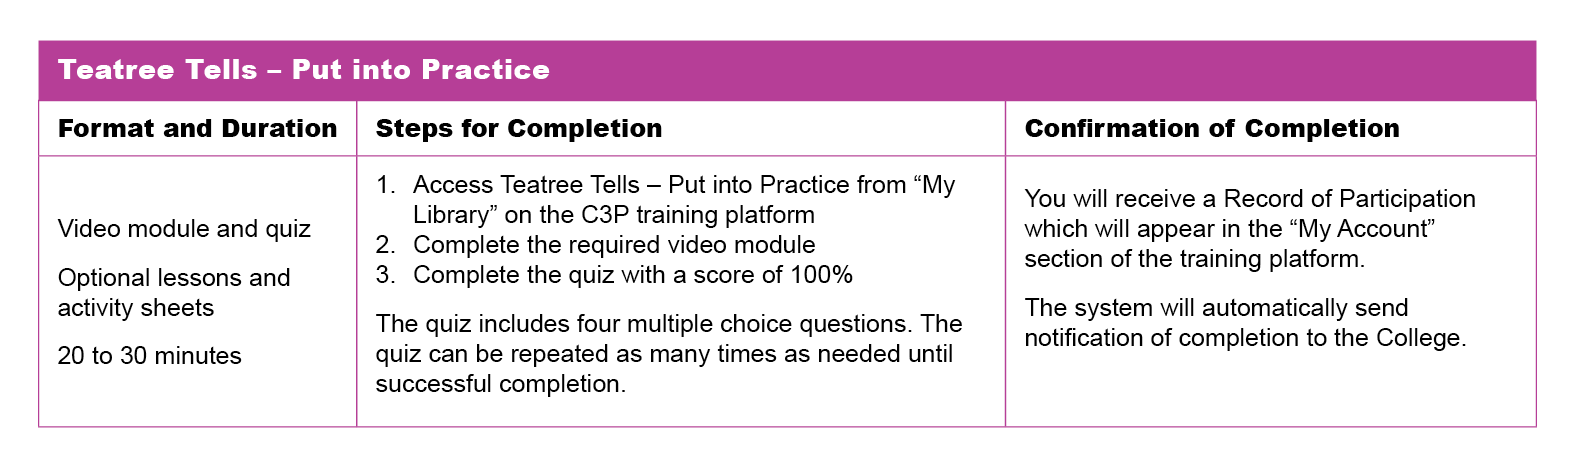 A table that explains the format and duration, steps for completion and confirmation of completion for the Teatree Tells Module. 